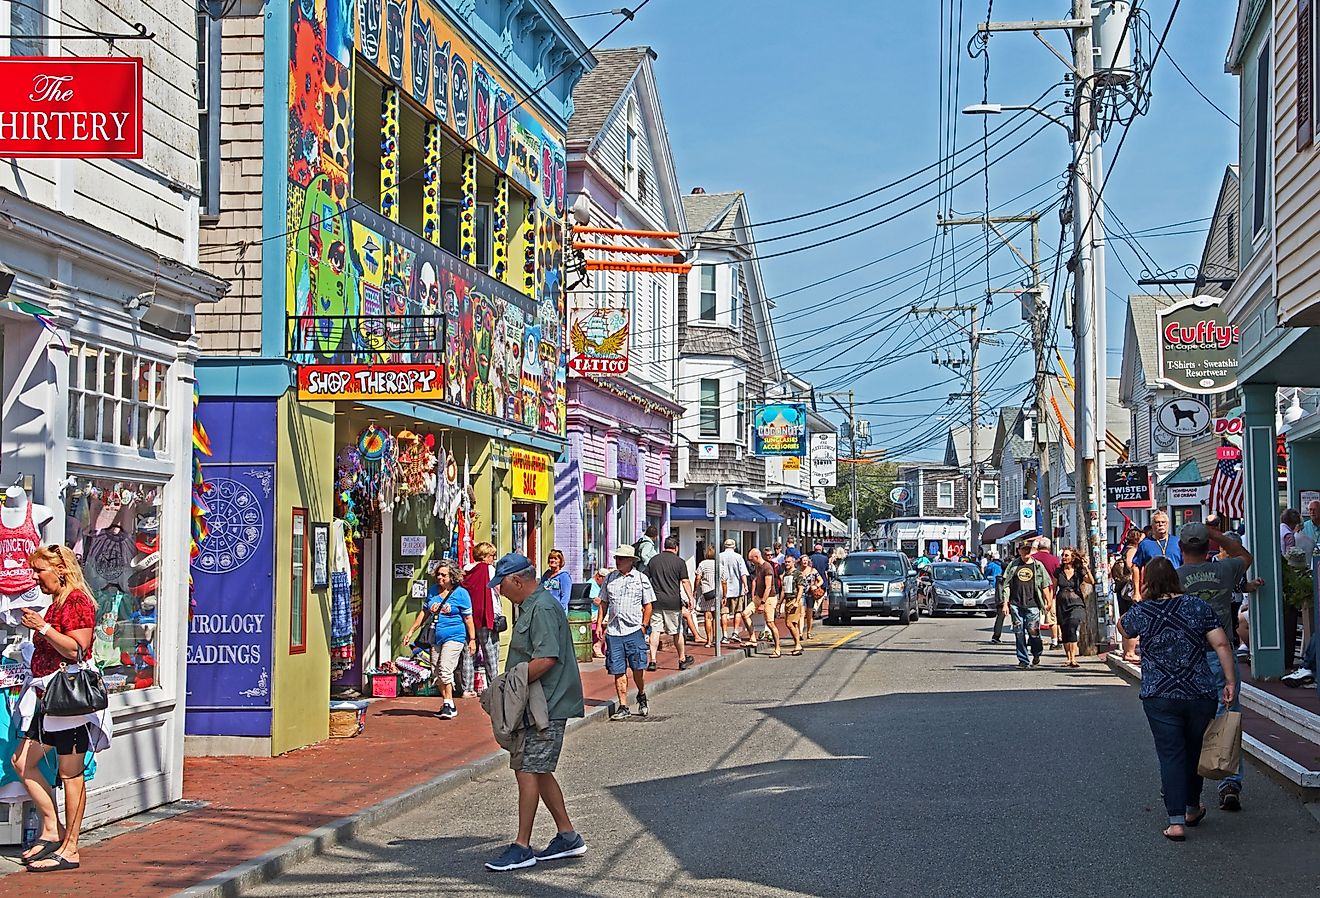 Commercial Street in Provincetown is home to a very eclectic range of stores, cafes and restaurants. Image credit Mystic Stock Photography via Shutterstock.